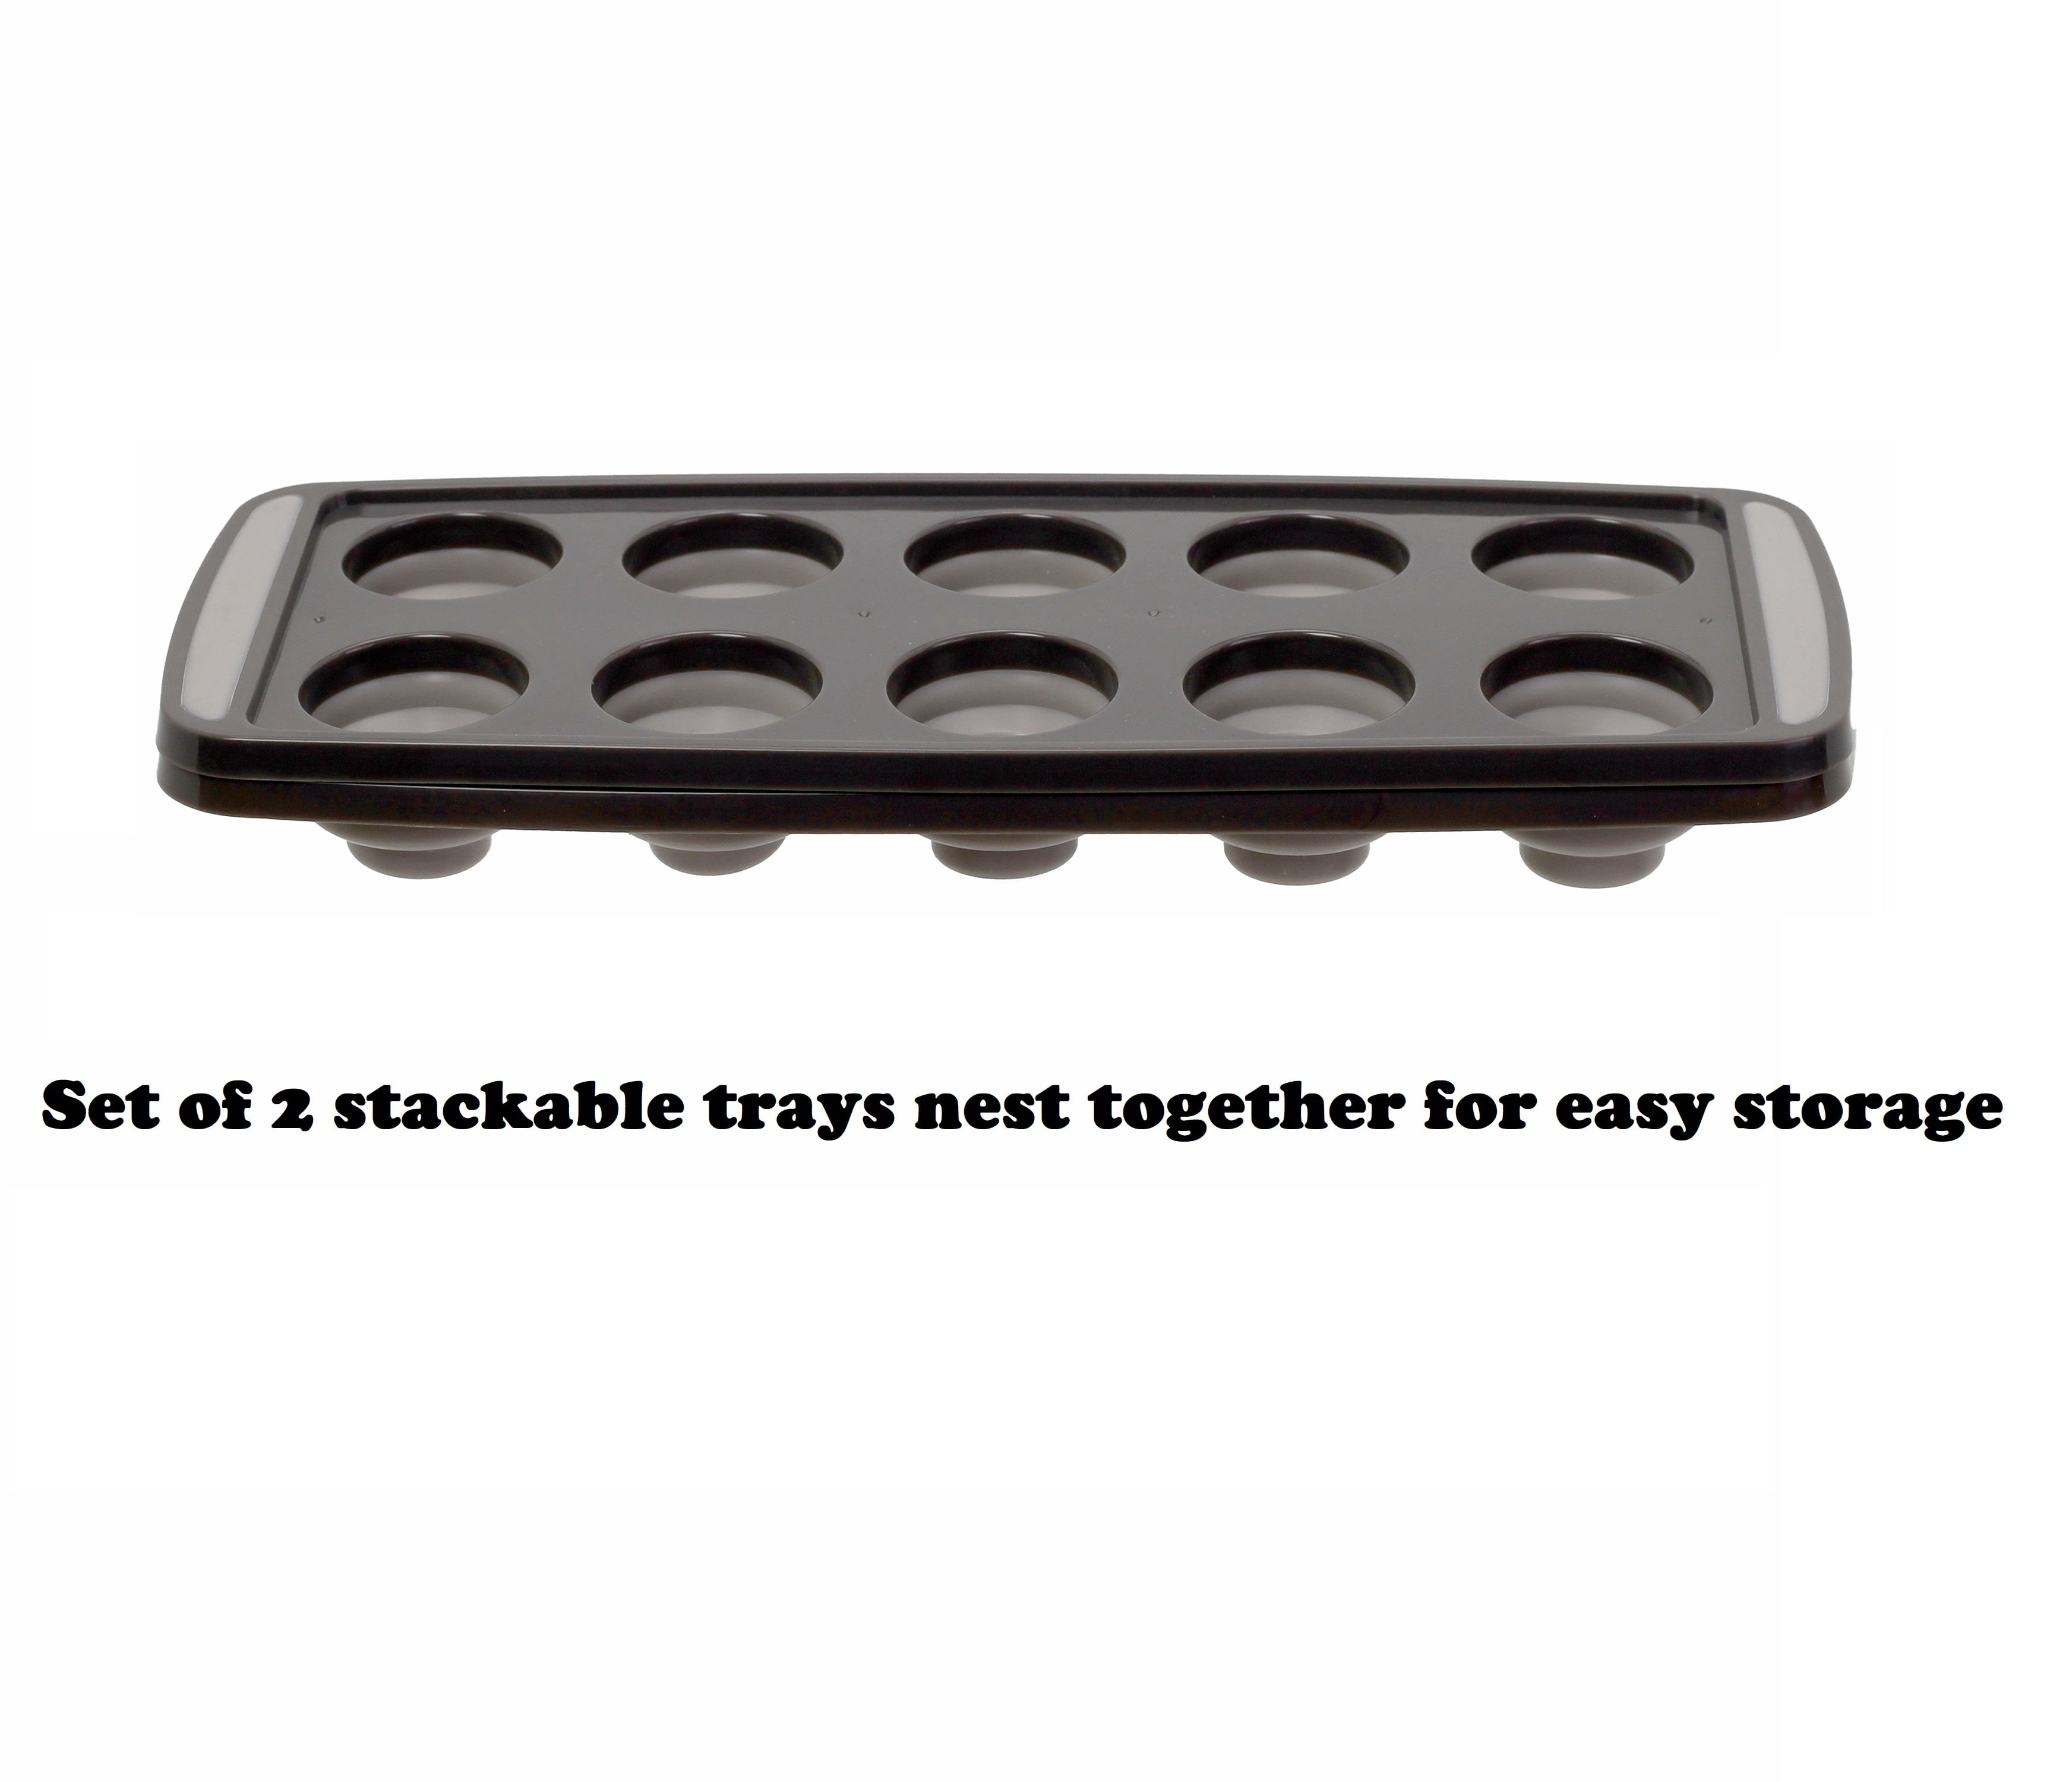  Casabella Big Ice Cube Tray, Cool Gray, Set of 2: Home & Kitchen